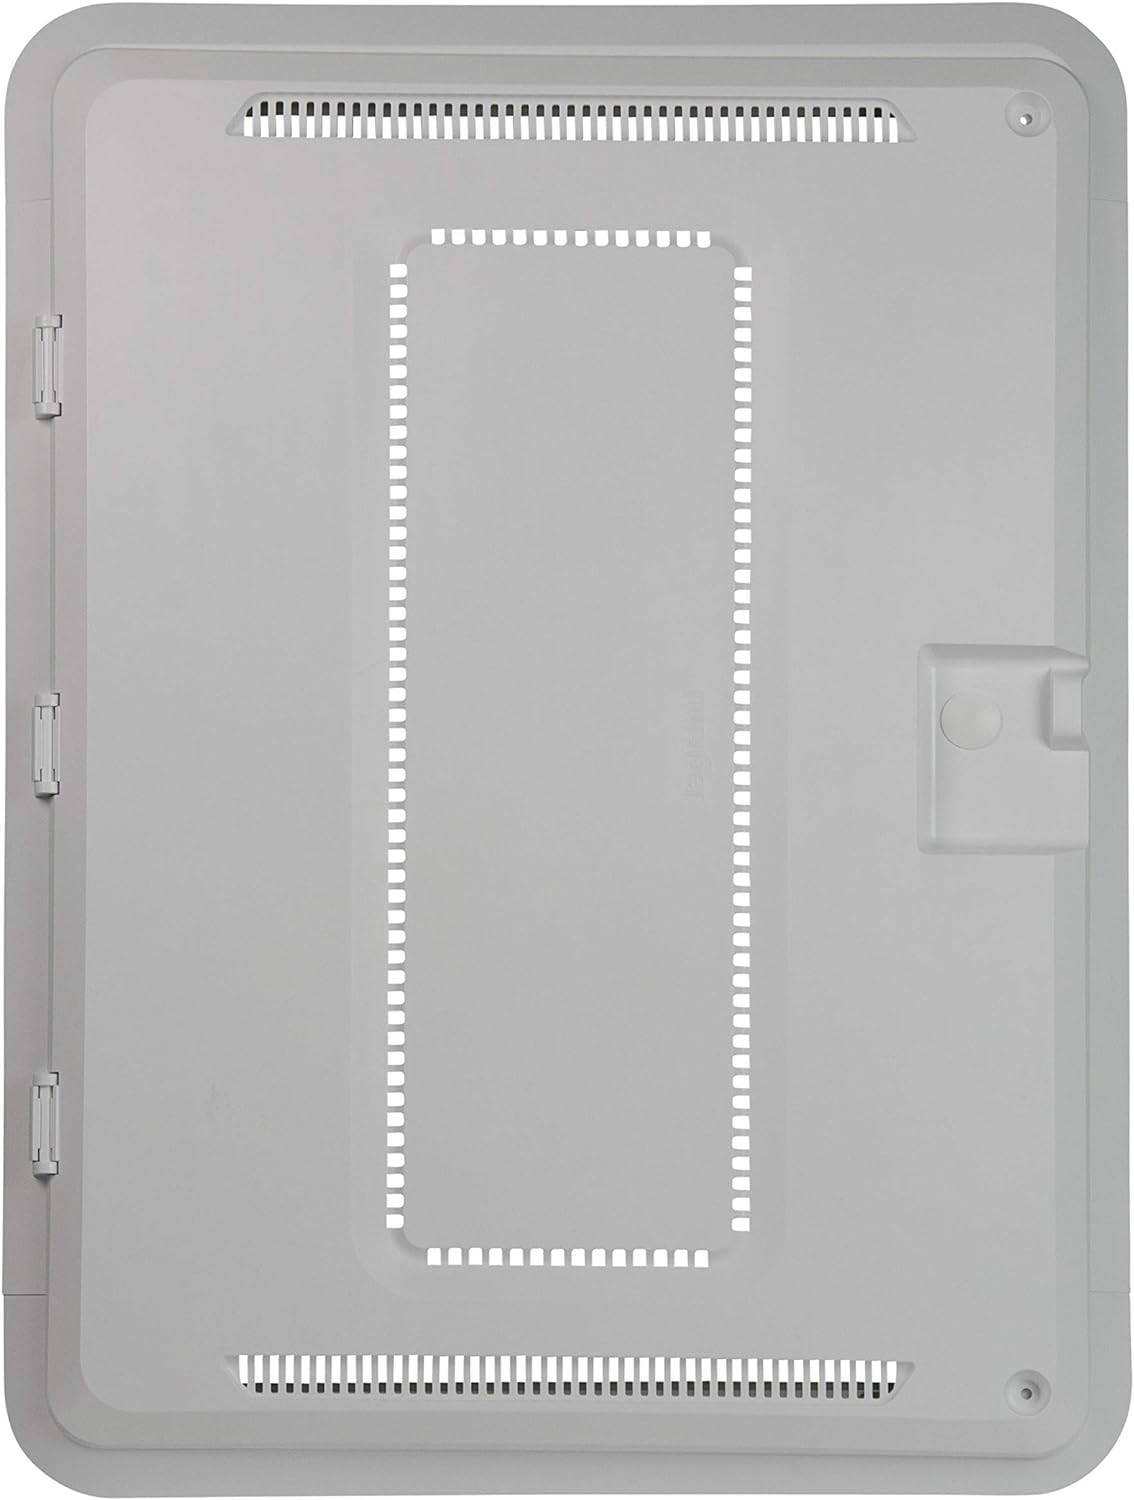 ON-Q Legrand - OnQ ENP2050-NA WiFi Compatible, Electrical Box Structured Media Enclosure, 20 inch, White